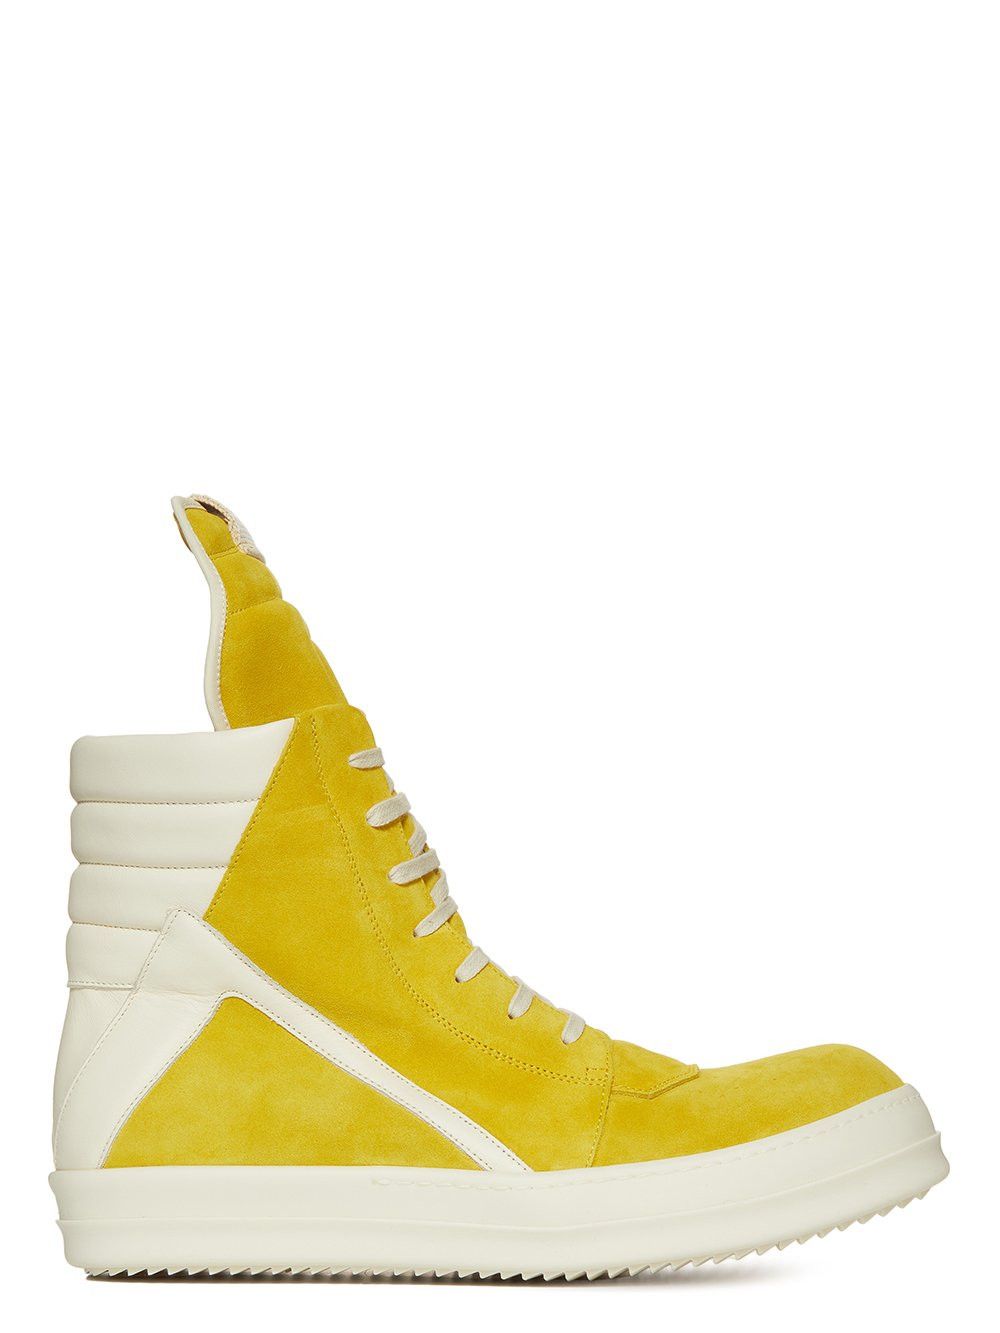 Pre-owned Rick Owens Sneakers Shoes Boots High Dunks Ramones In White/yellow